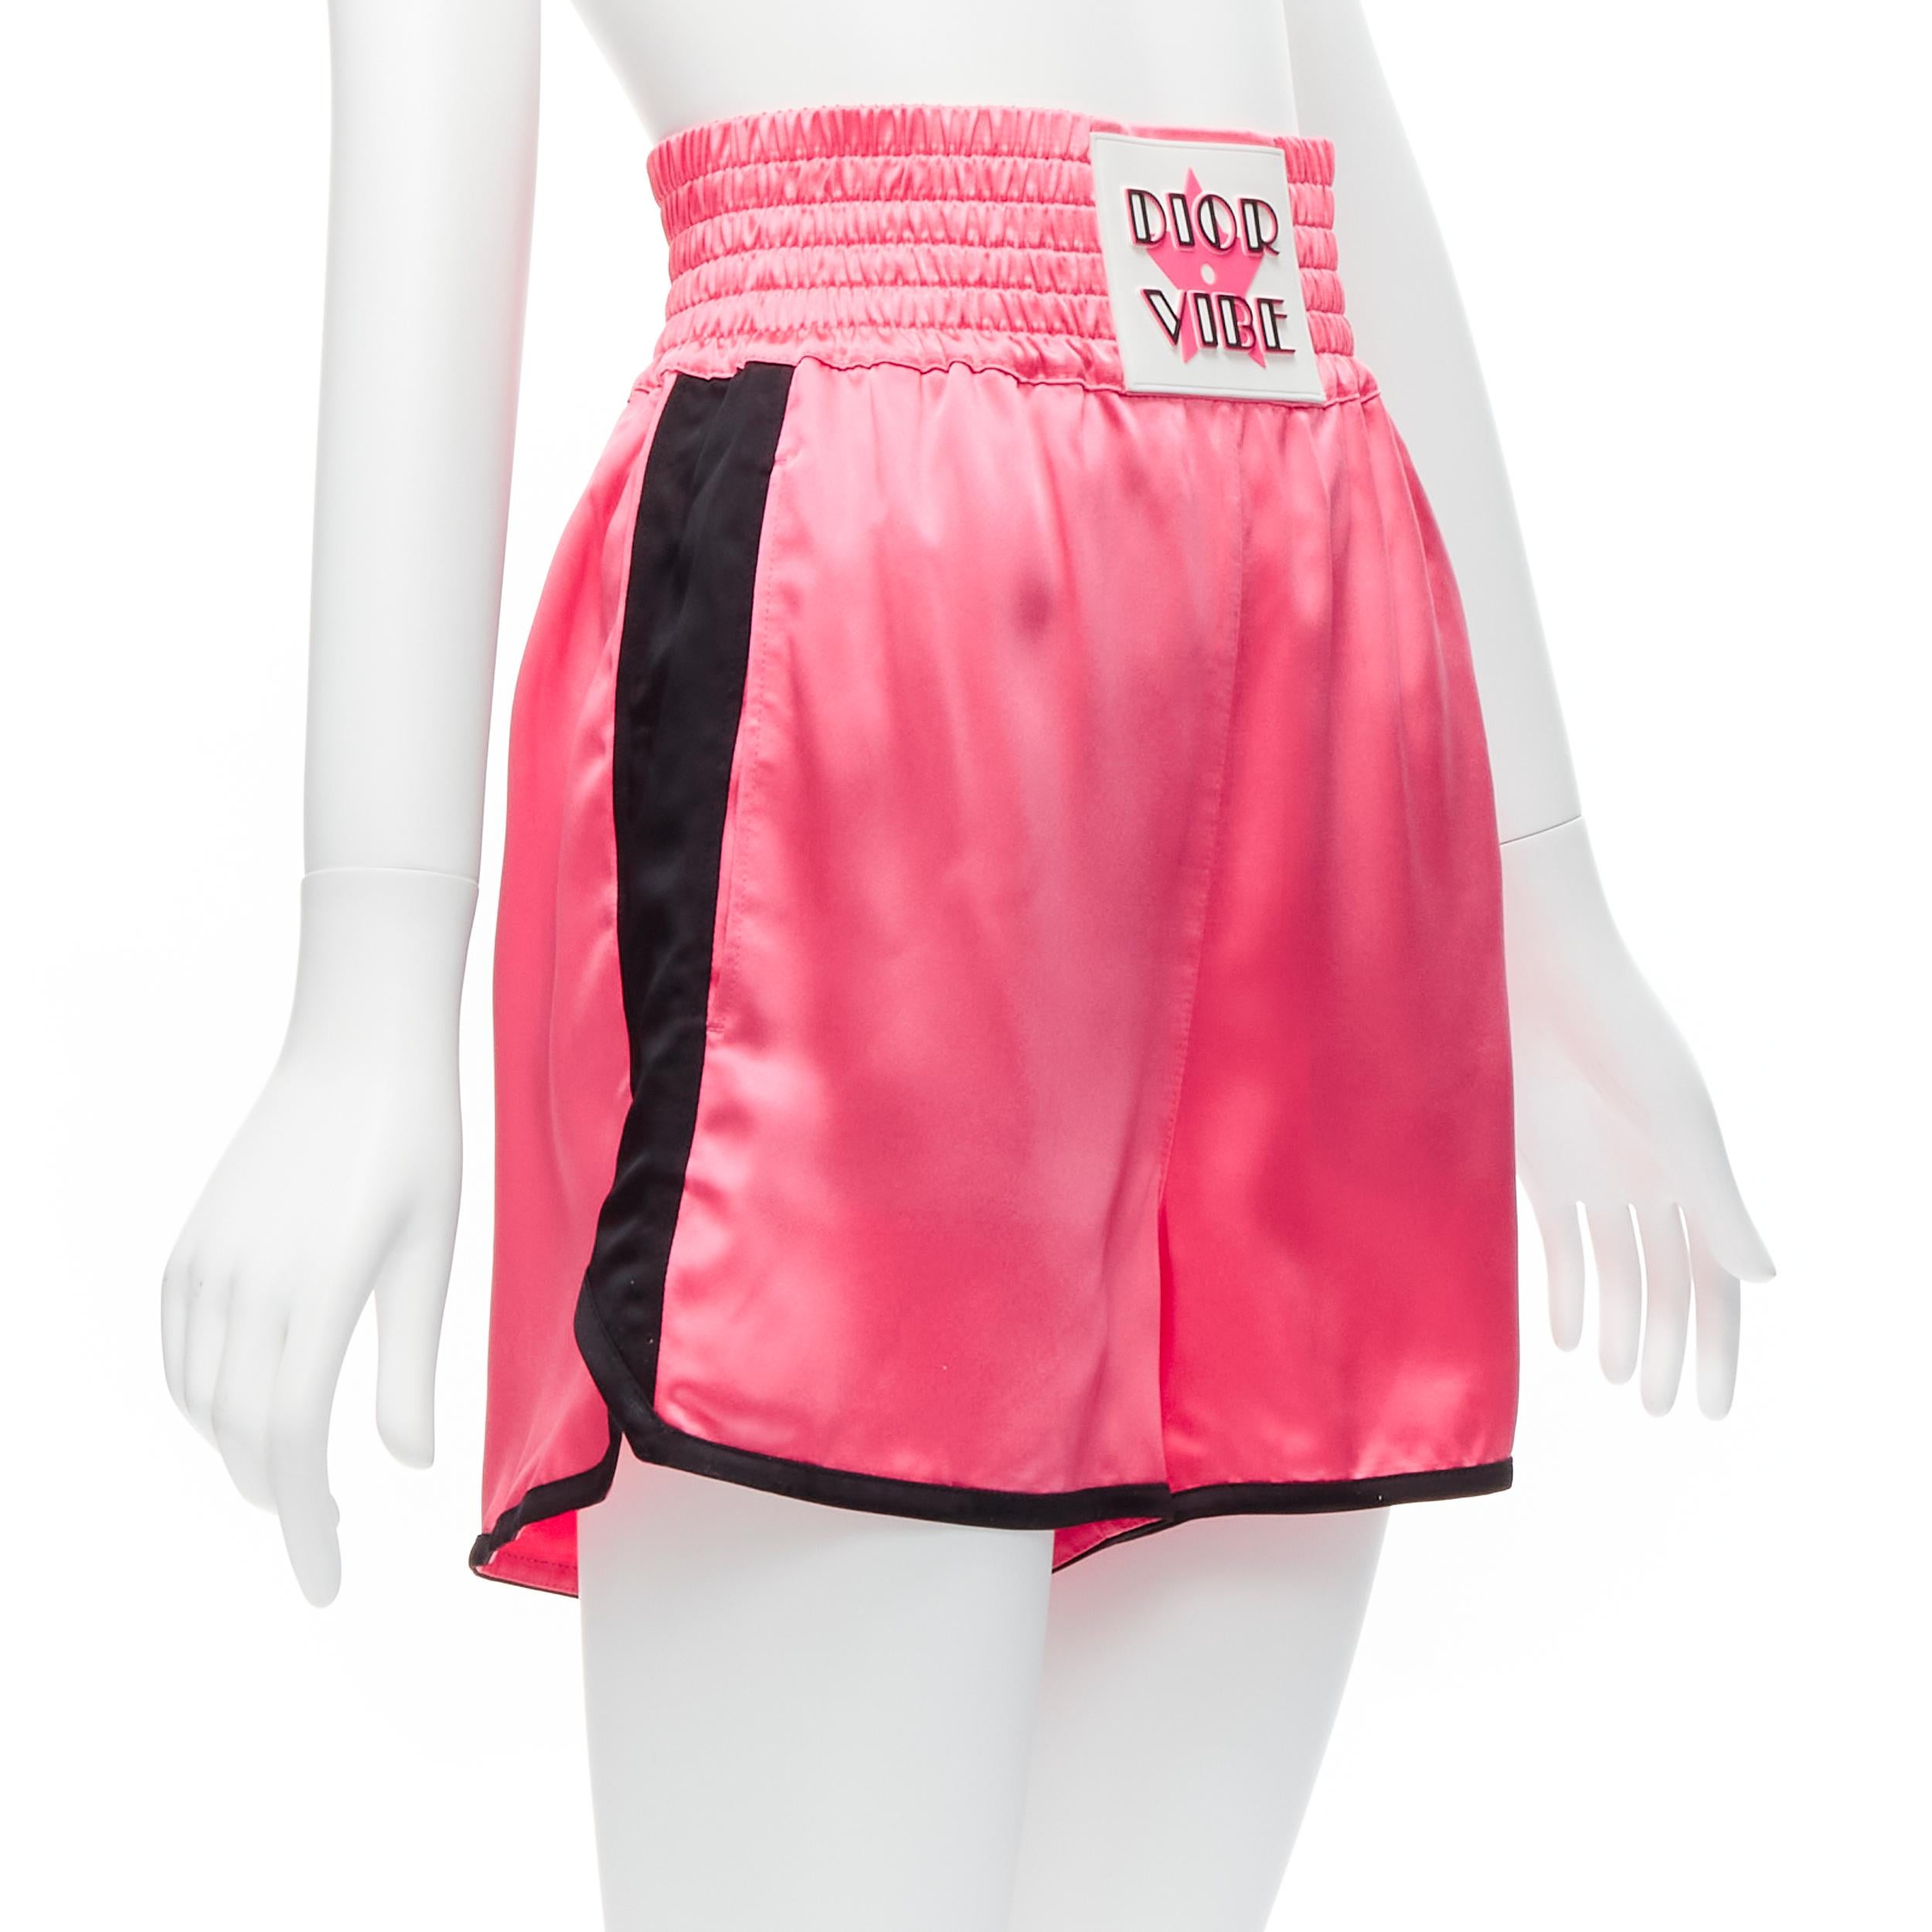 CHRISTIAN DIOR 2022 Dior Vibe pink satin black panels boxing shorts XS
Reference: AAWC/A00494
Brand: Christian Dior
Designer: Maria Grazia Chiuri
Collection: 2022 Dior Vibe
Material: Viscose
Color: Pink, Black
Pattern: Solid
Closure: